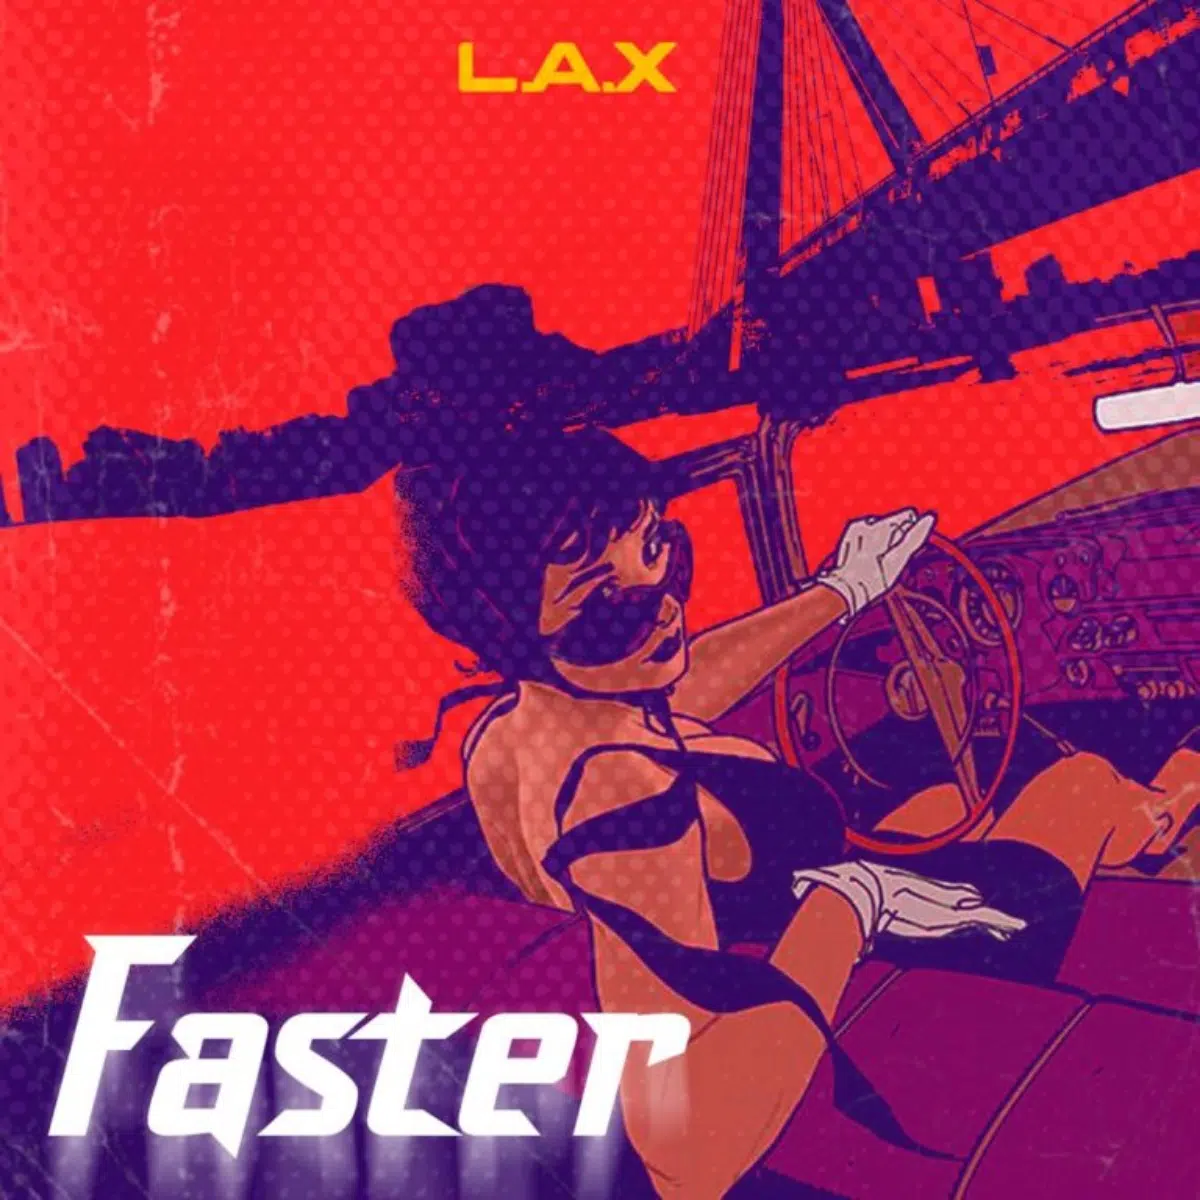 DOWNLOAD: L.A.X – “Faster” Video + Audio Mp3